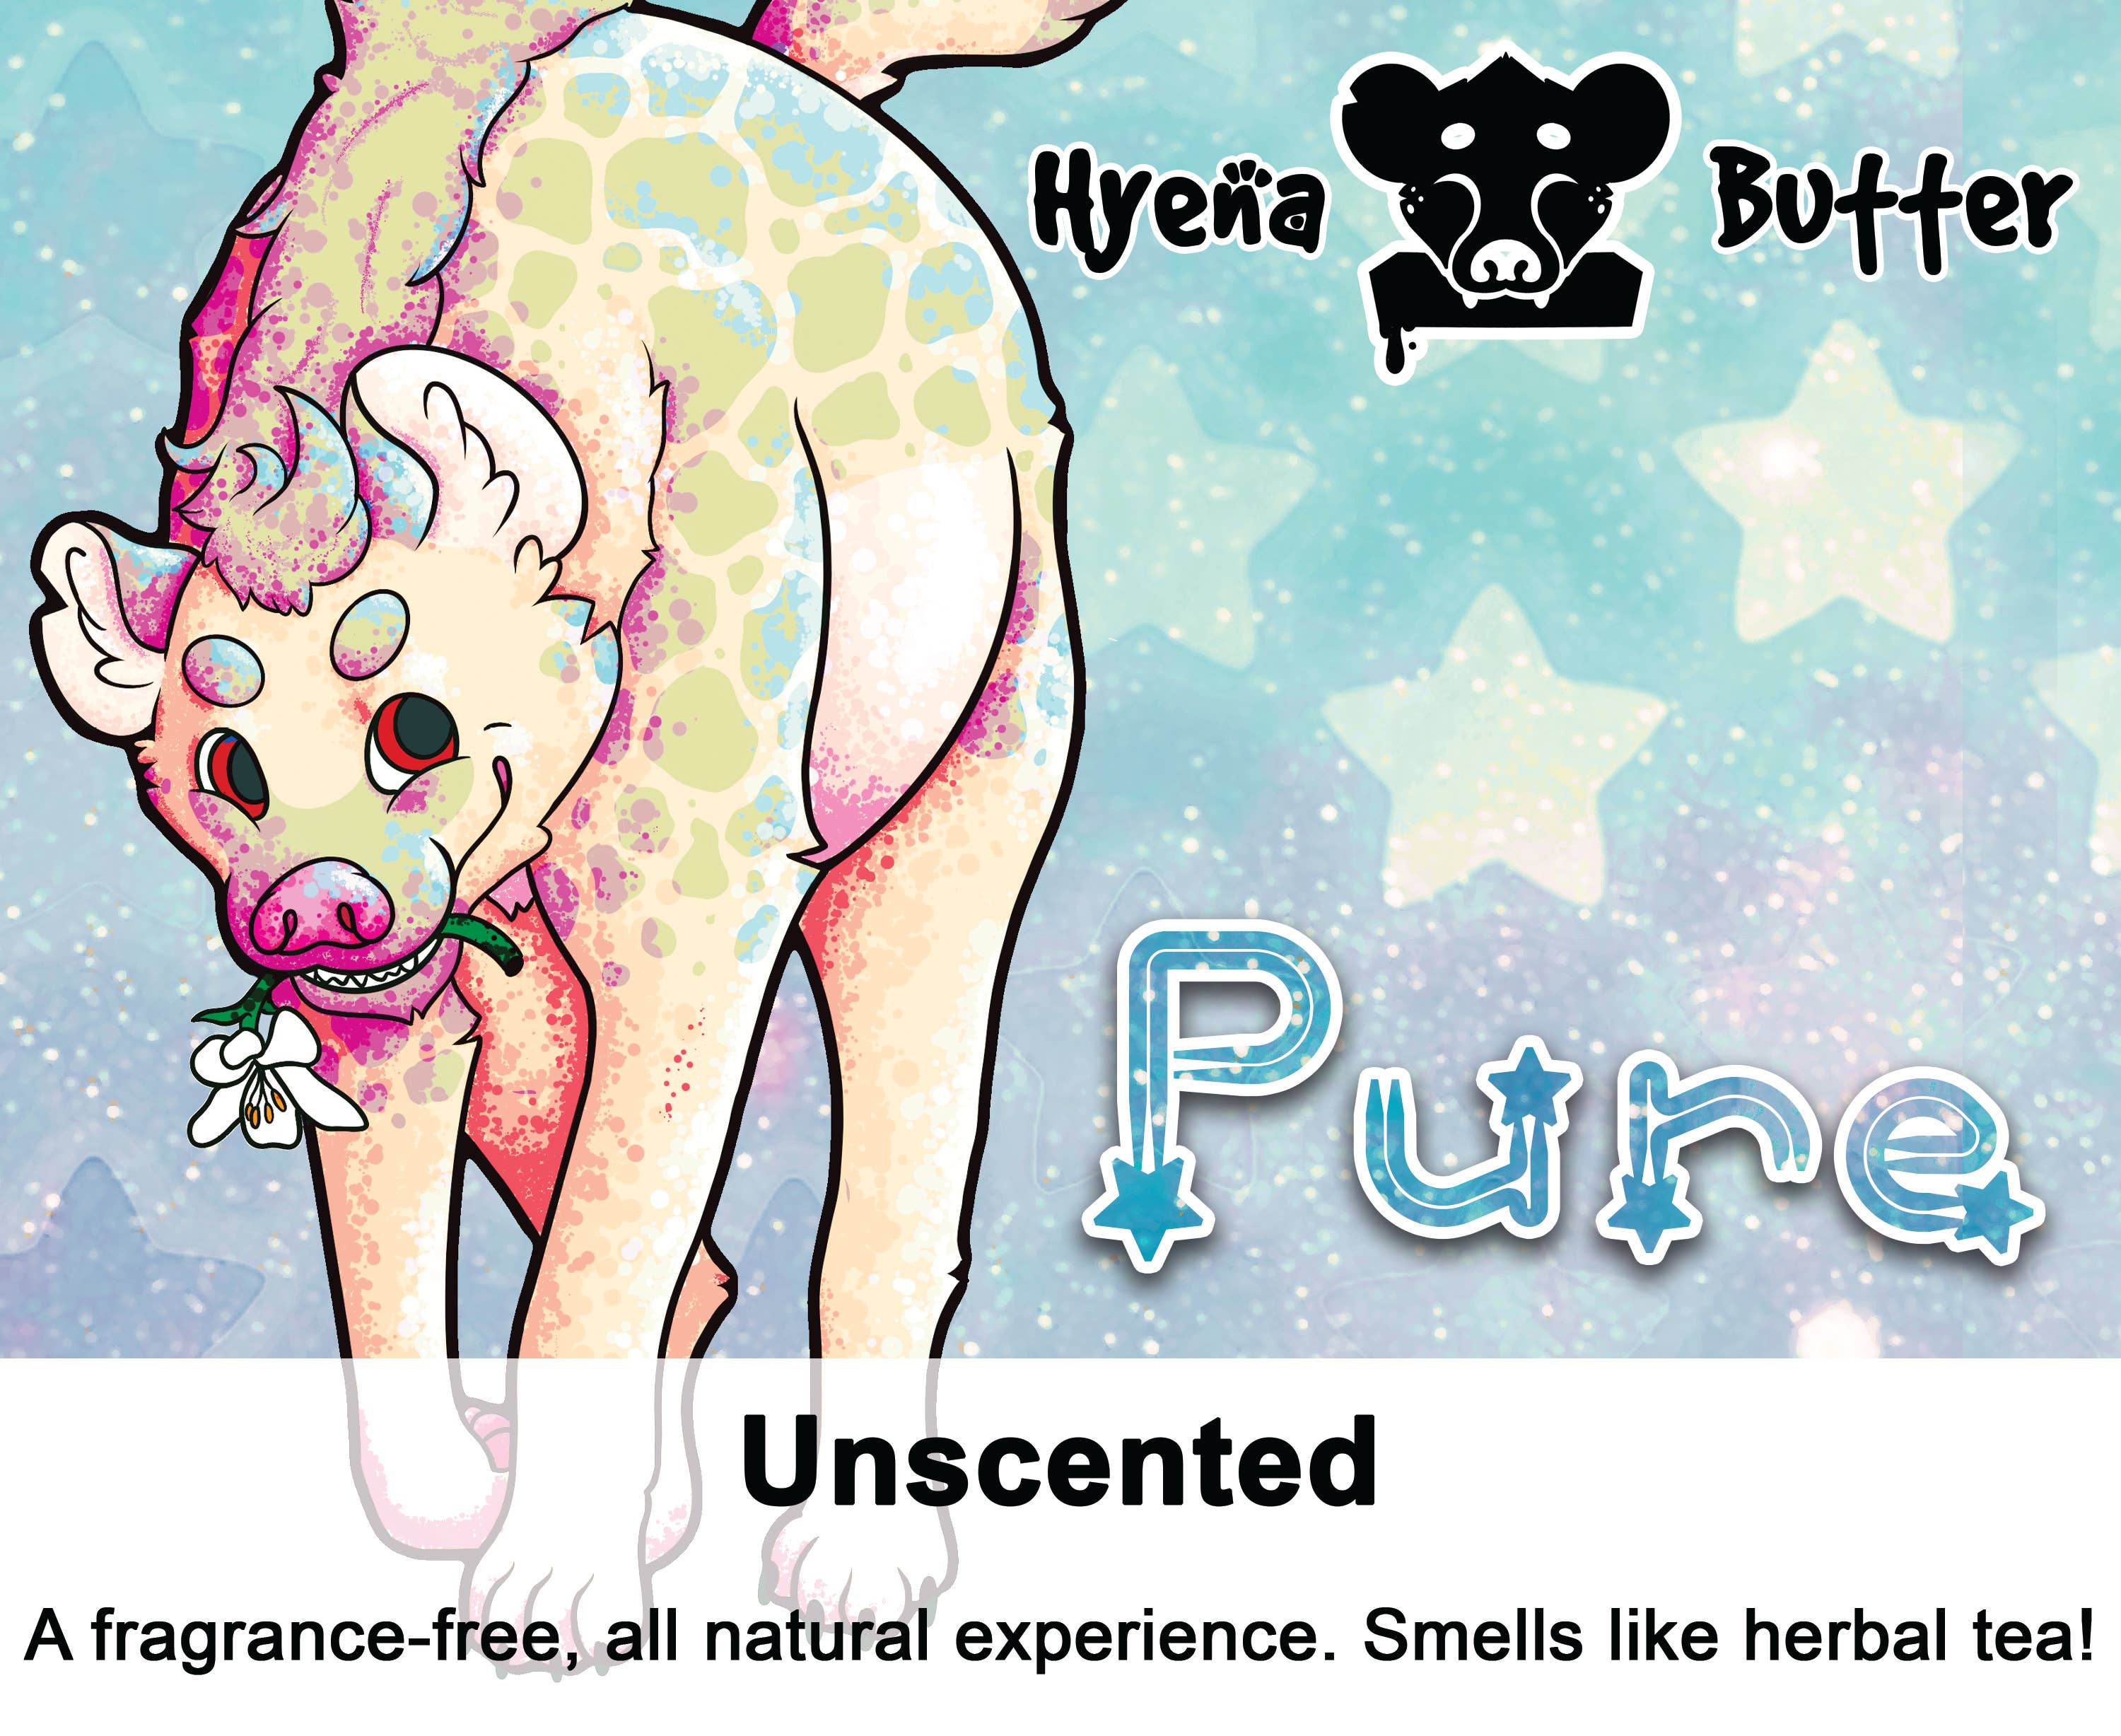 Wholesale Hyena Butter: Cozy Nooks for your store - Faire Canada